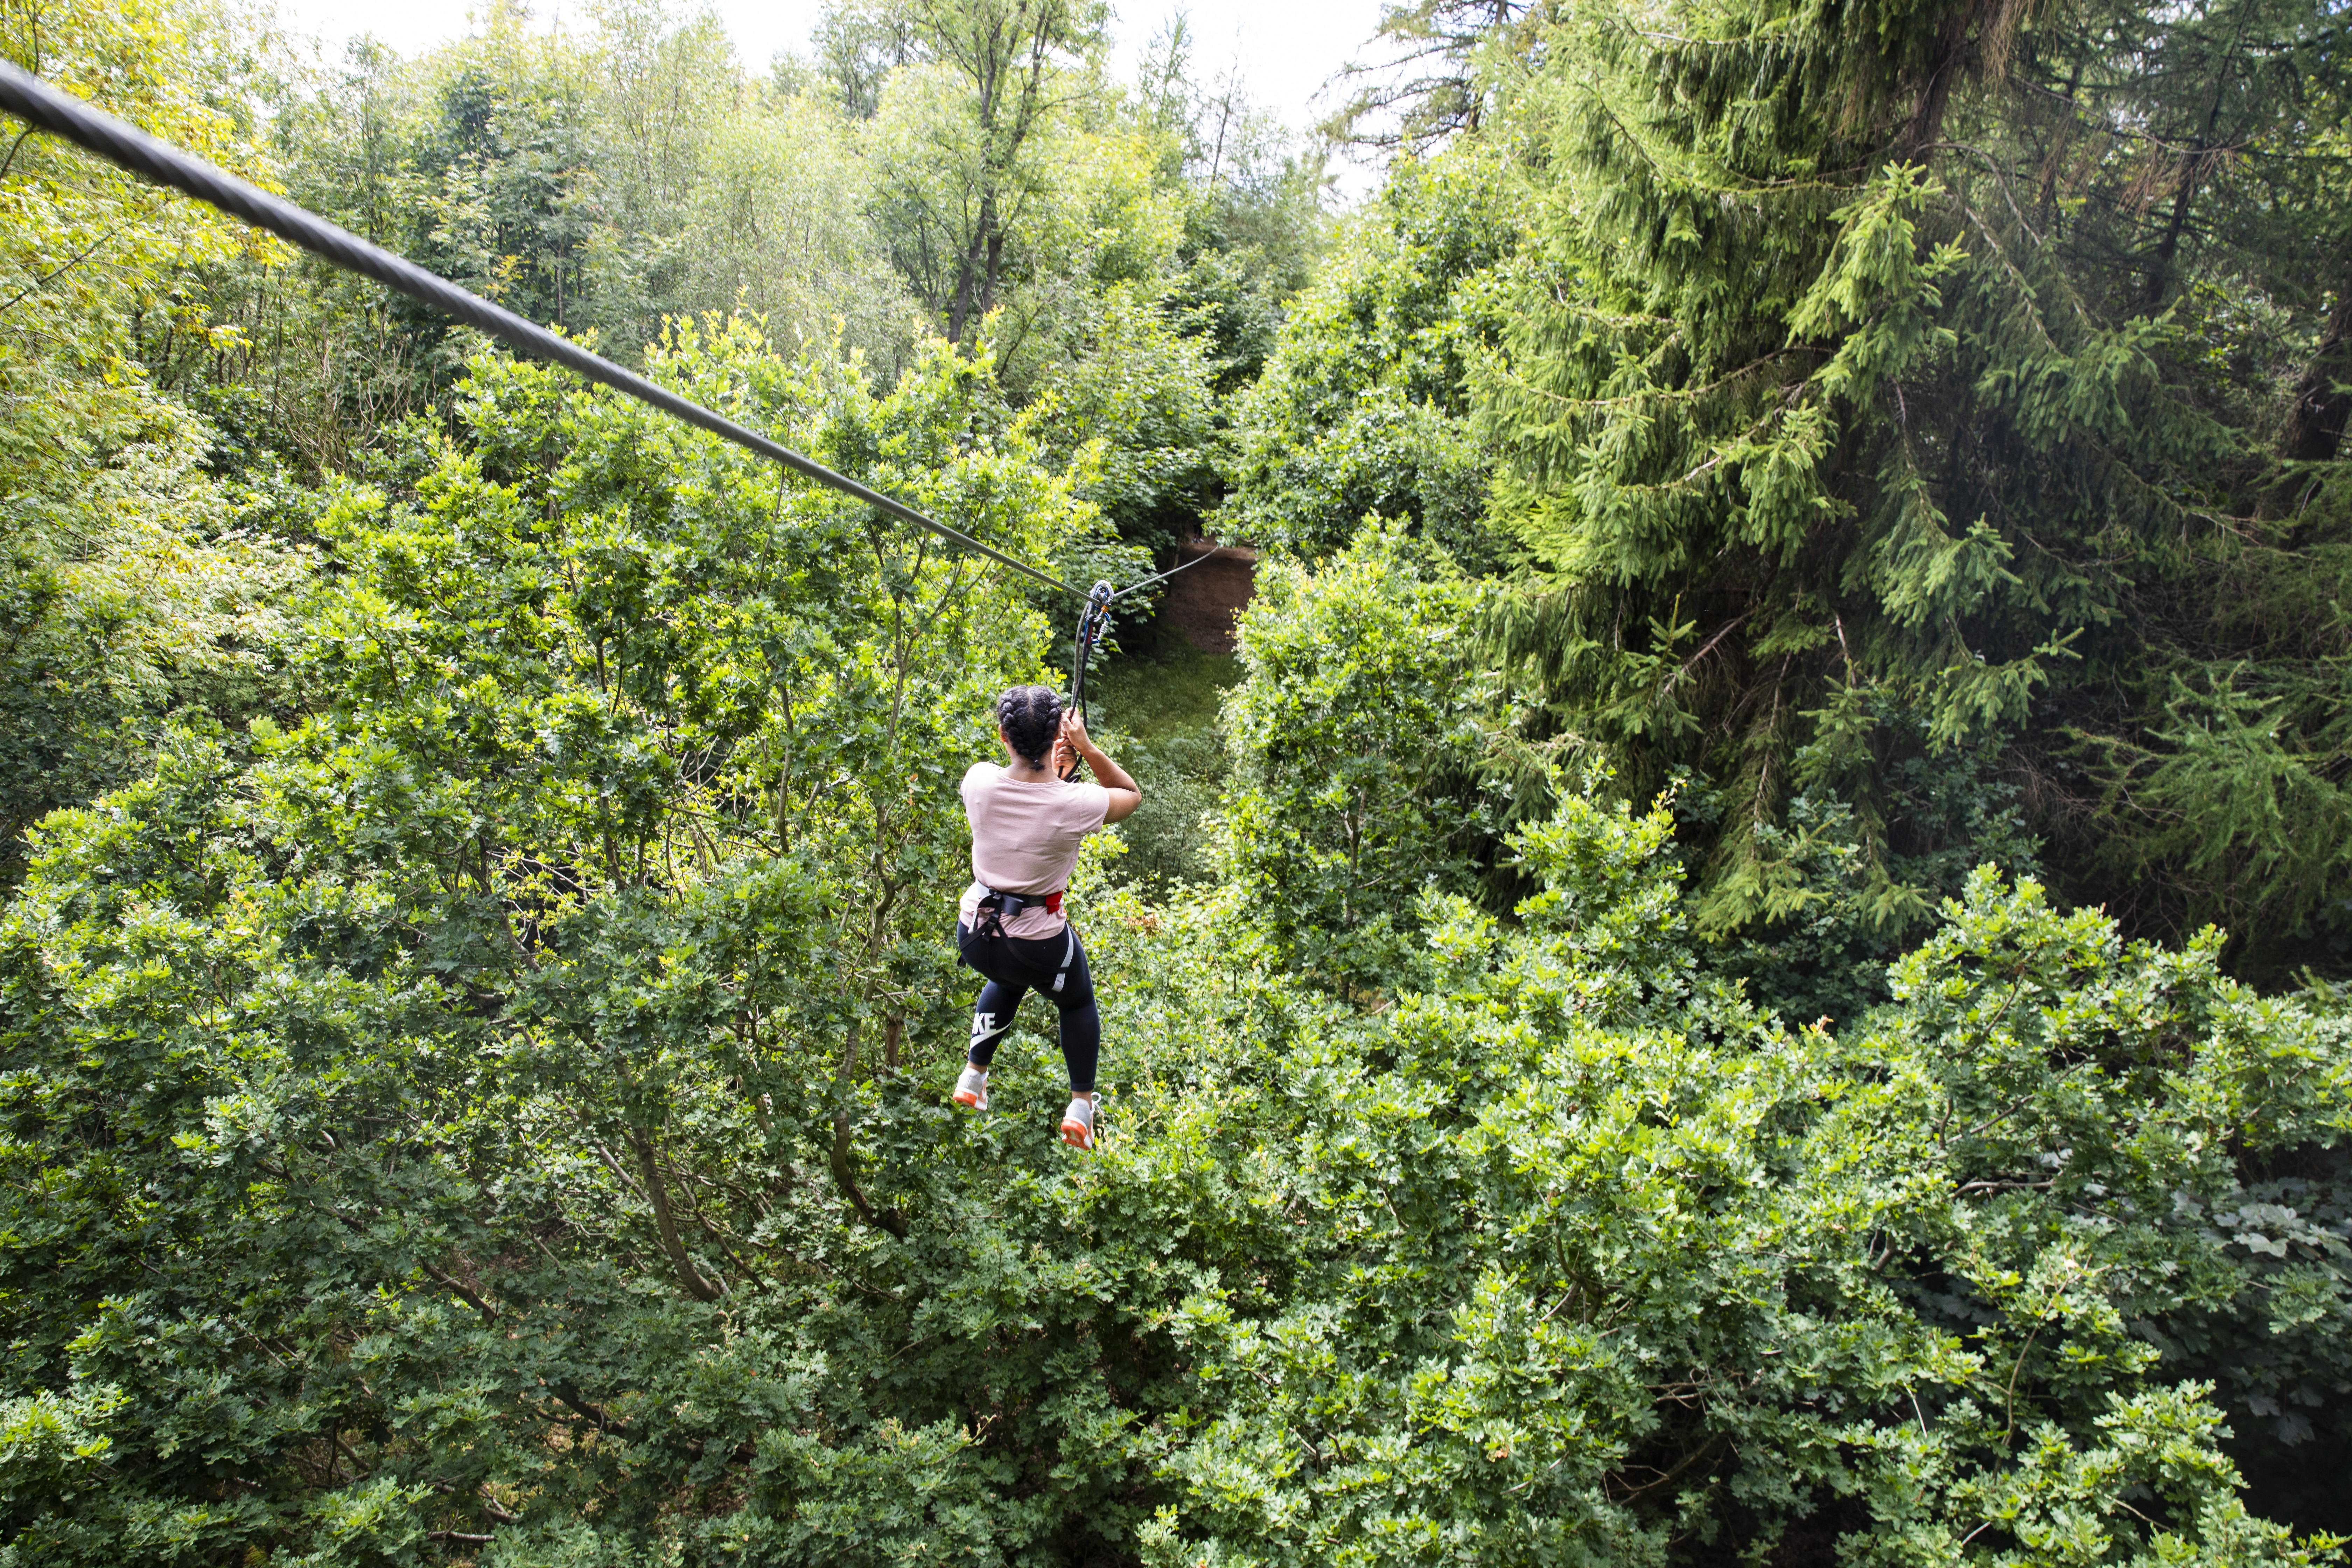 High Ropes For The Adventurous In Wendover Go Ape